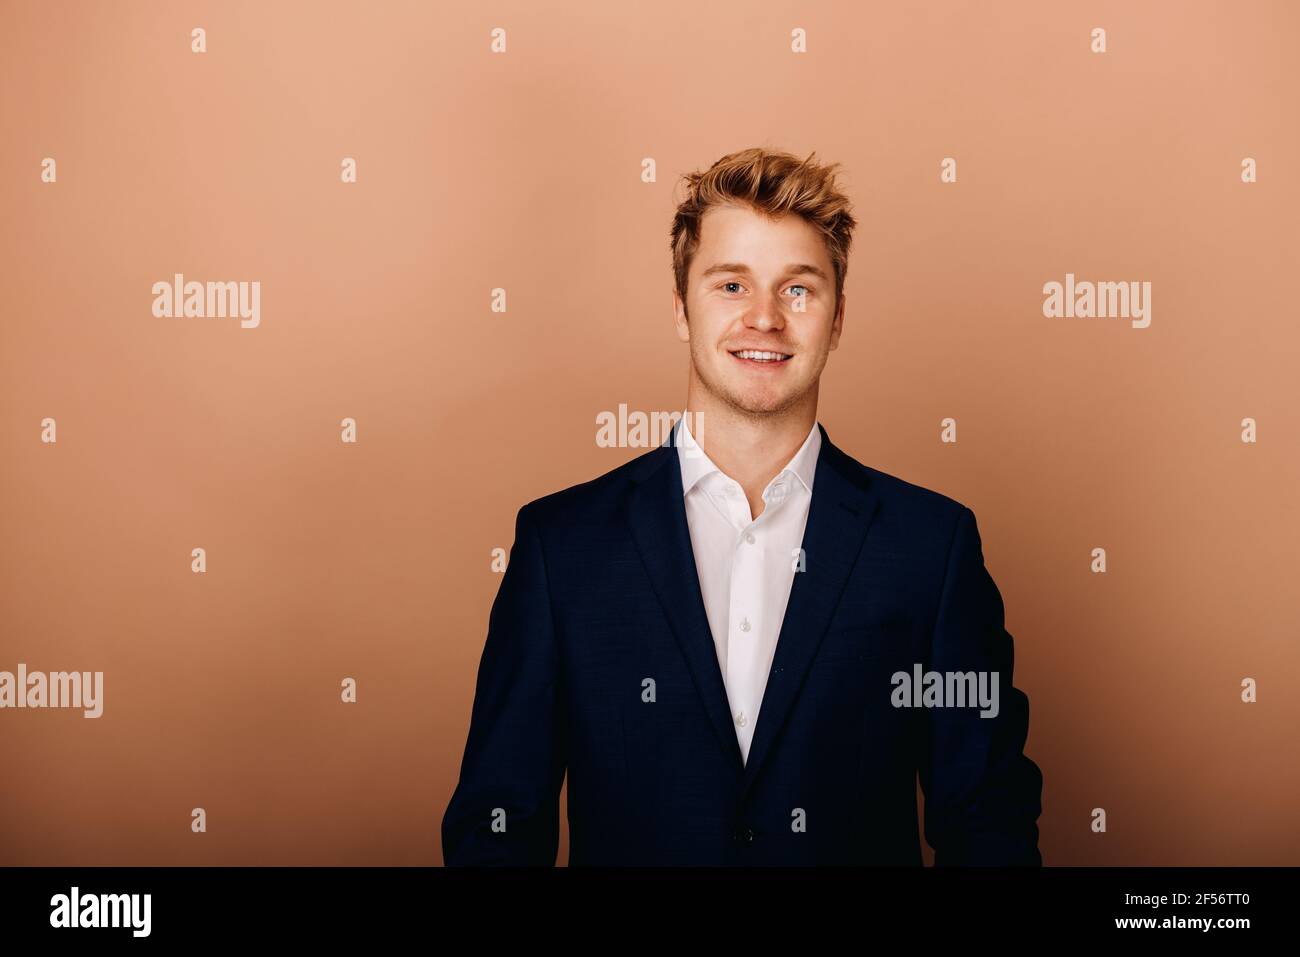 Handsome businessman standing against brown background Stock Photo